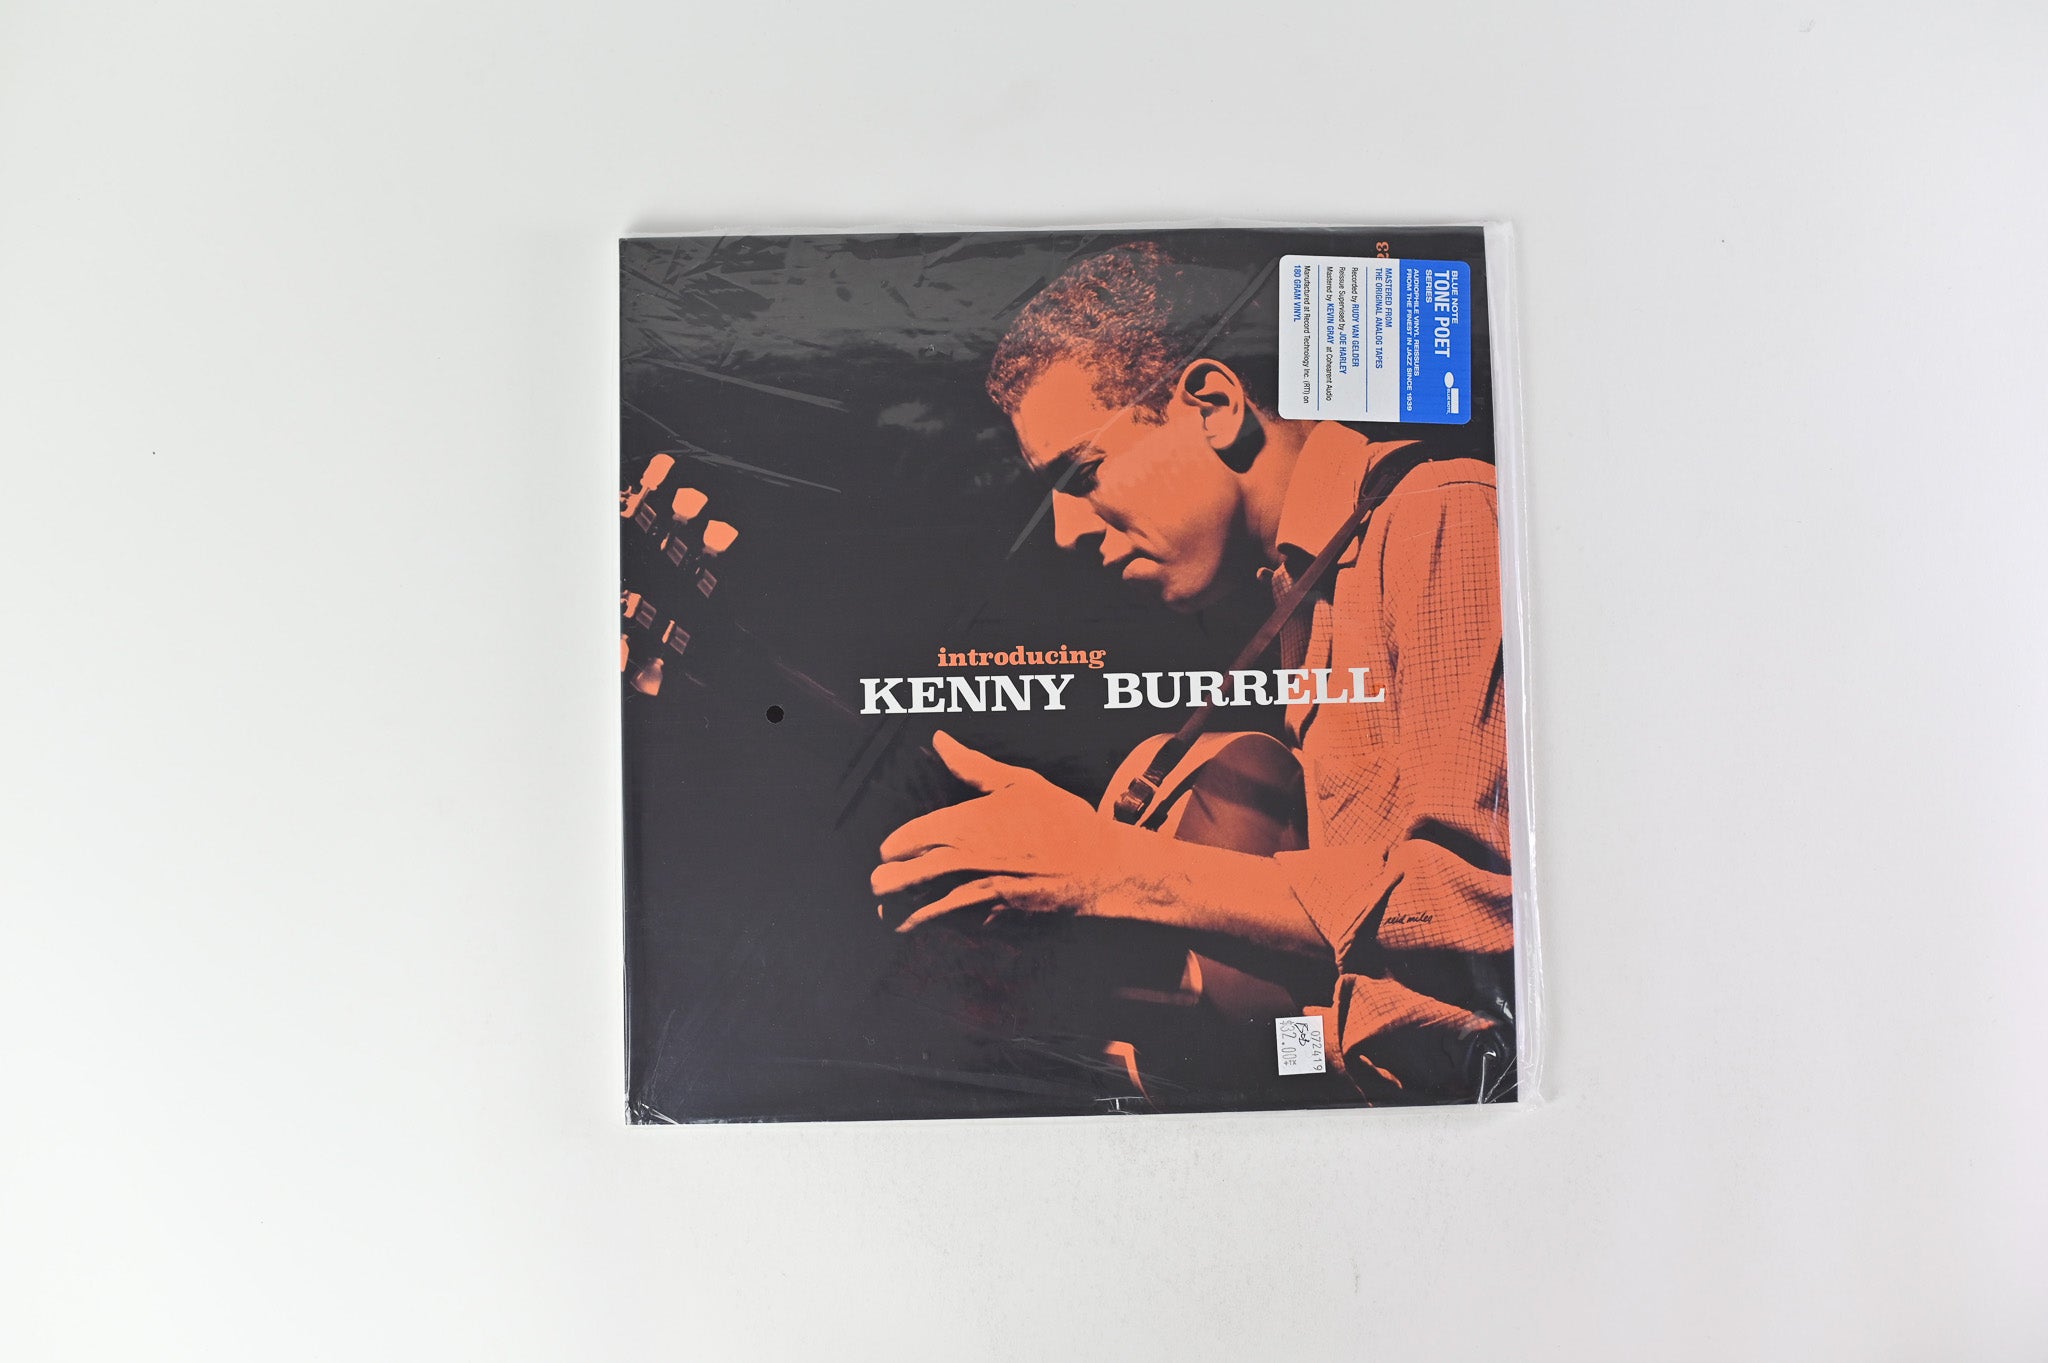 Kenny Burrell - Introducing Kenny Burrell on Blue Note Tone Poet Series